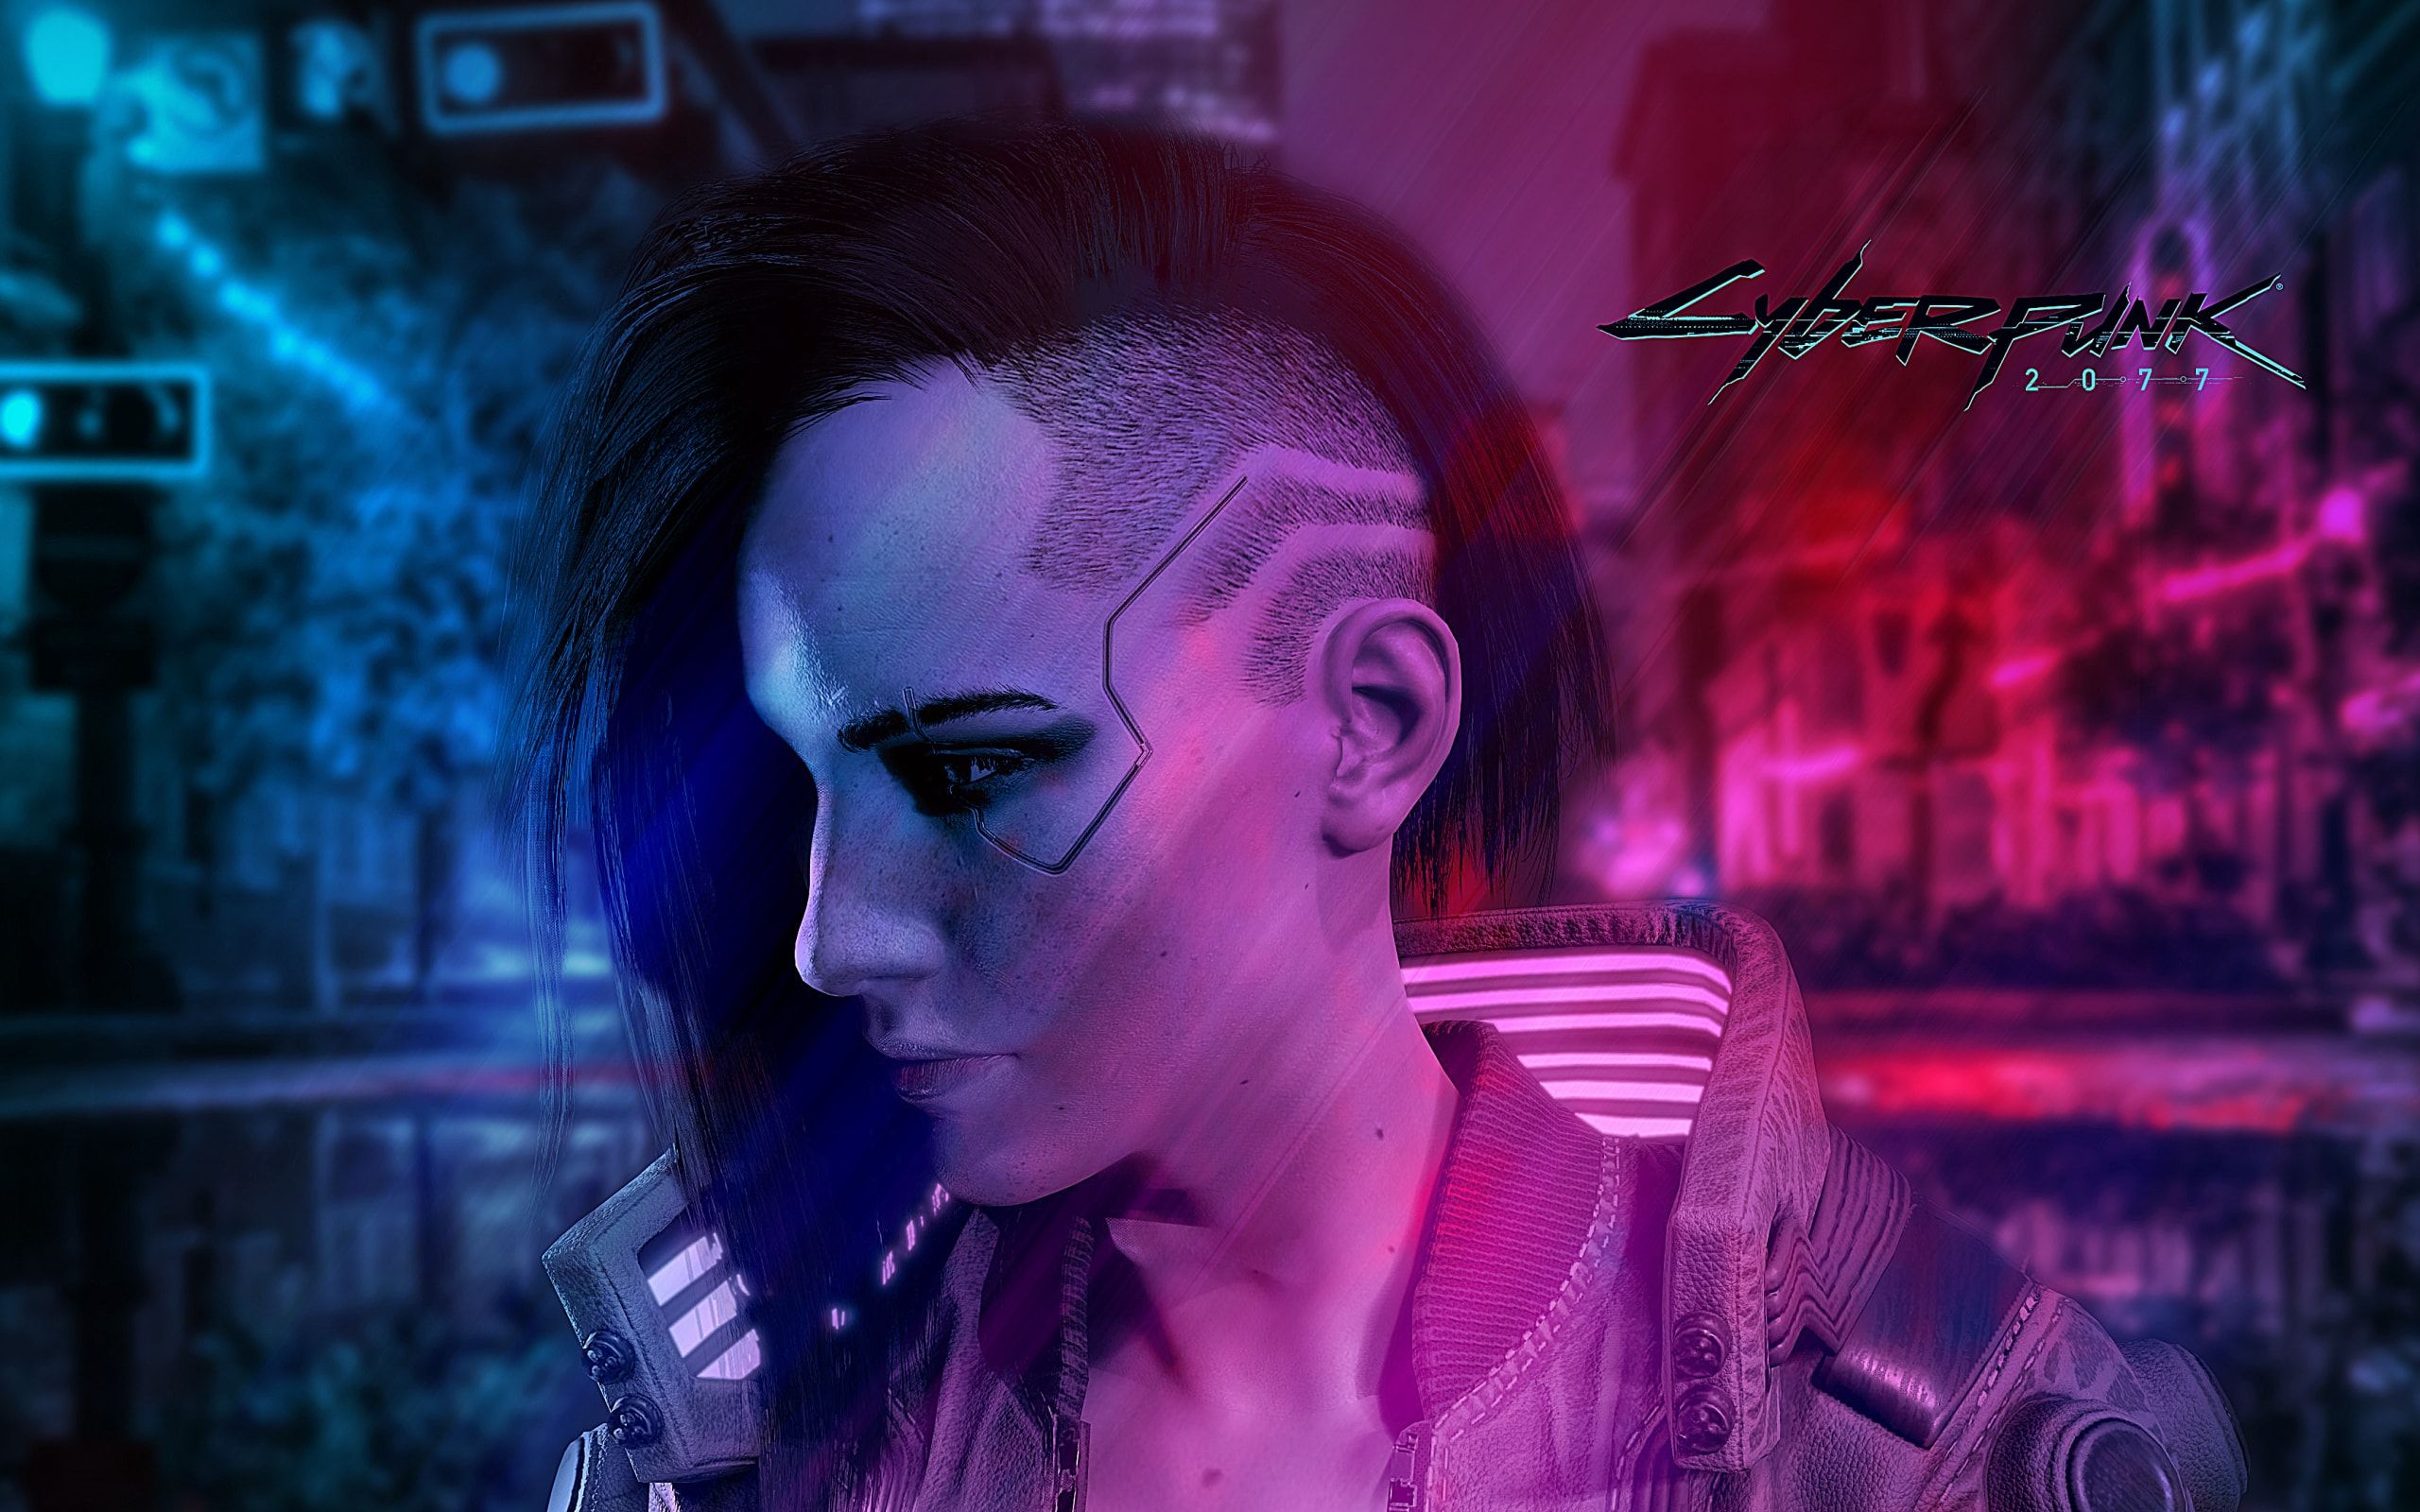 Wallpaper of Video Game, Cyberpunk Girl, Poster background